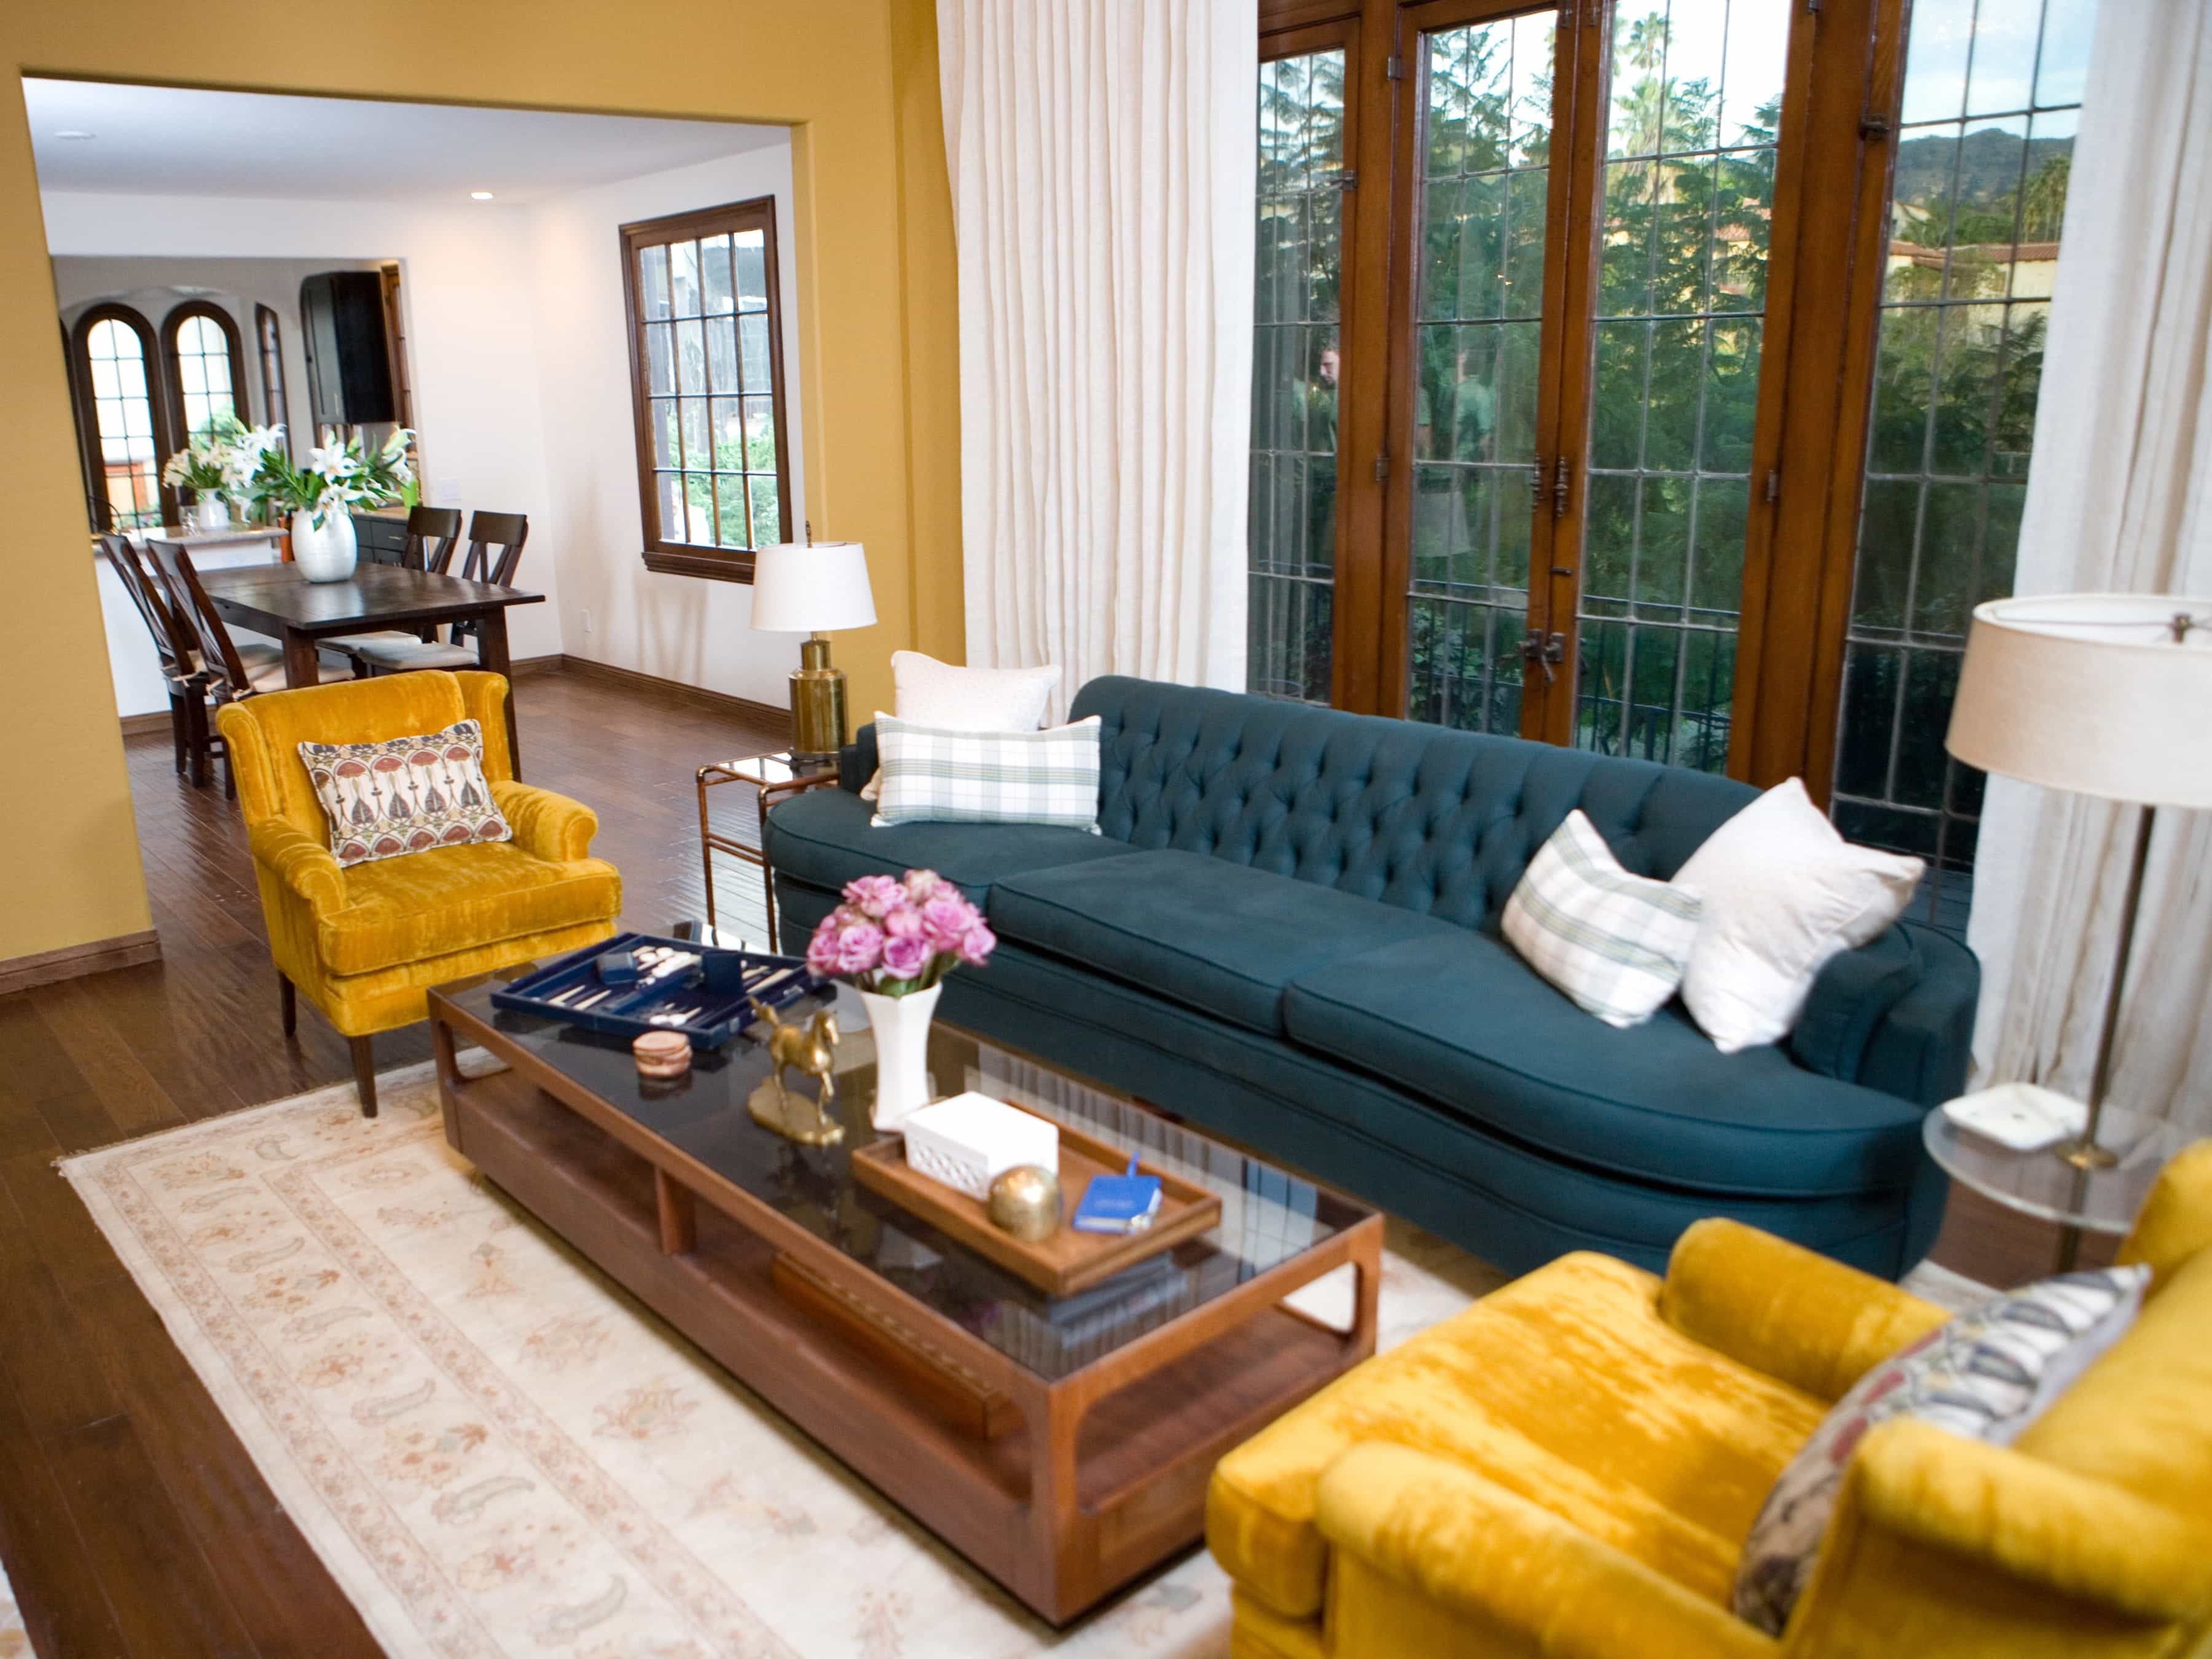 Chic Living Room Interior Decoration With Blue Tufted Sofa And Gold Velvet Chairs (View 1 of 16)